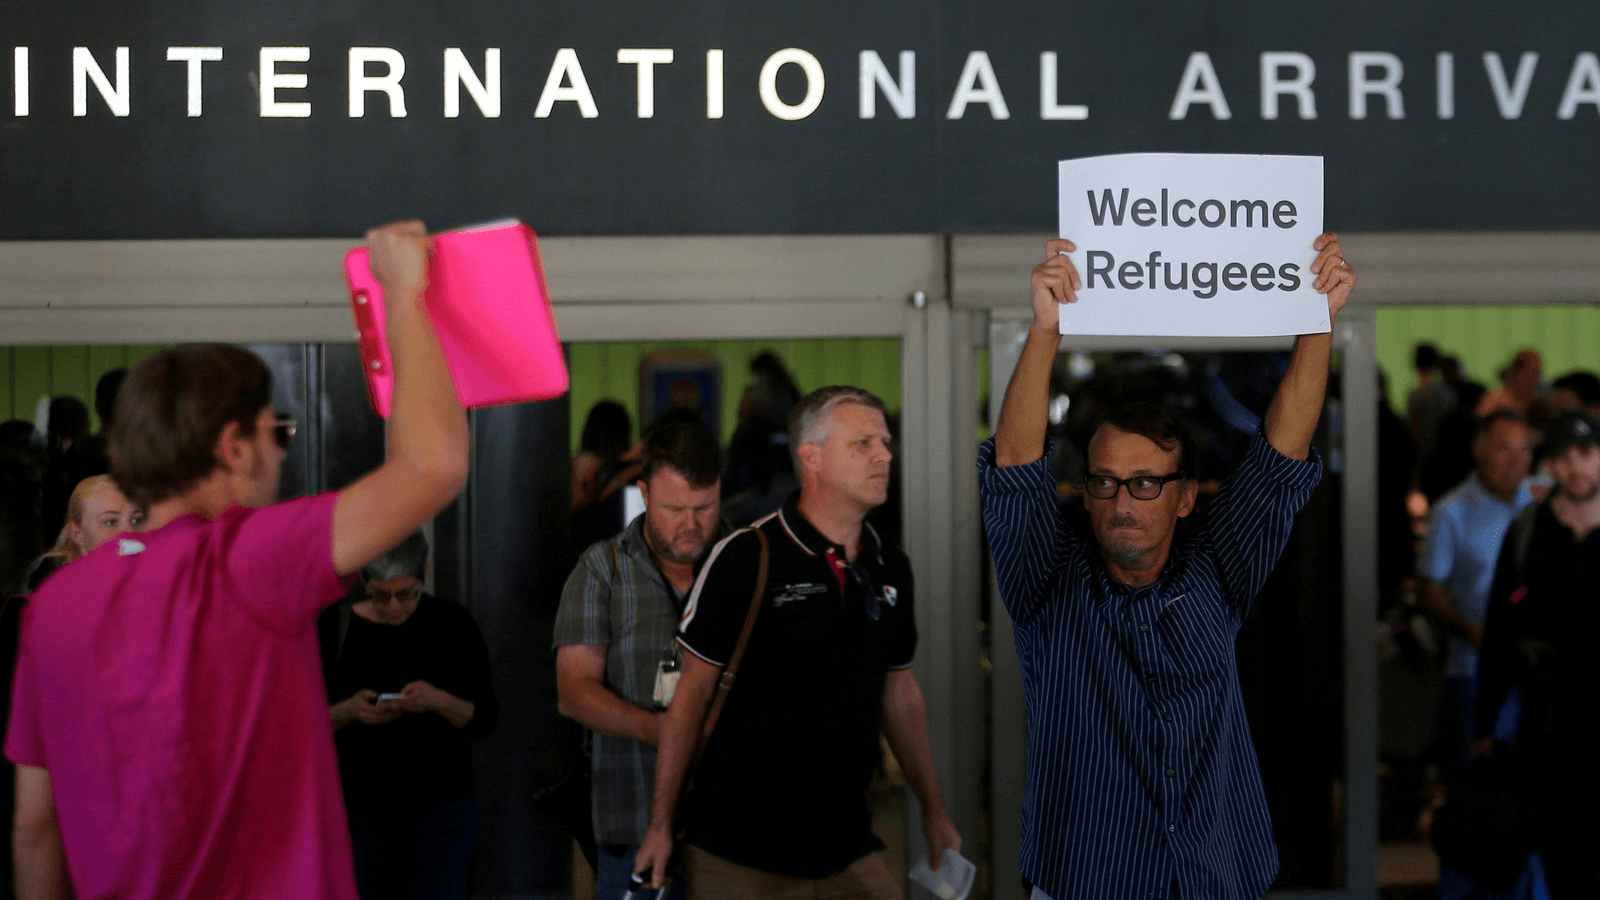 Retired engineer John Wider, 59, is greeted by a supporter of President Donald Trump as he holds up a sign reading "Welcome Refugees" at the international arrivals terminal at Los Angeles International Airport in Los Angeles, California, on June 29, 2017.